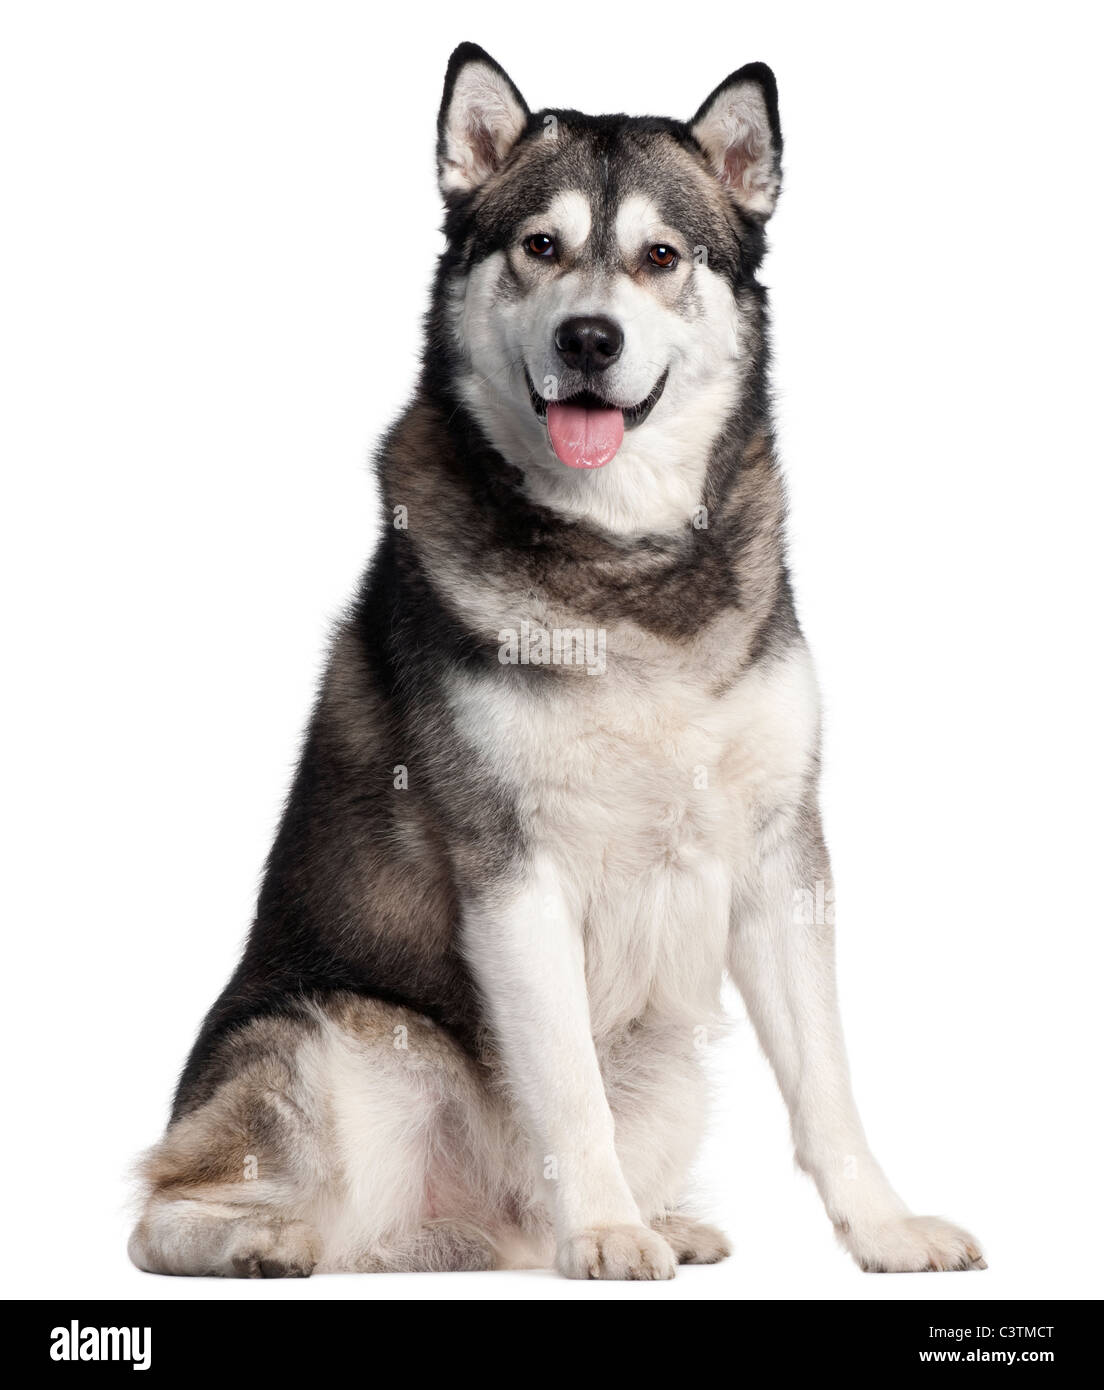 Alaskan Malamute, 2 years old, sitting in front of white background Stock Photo